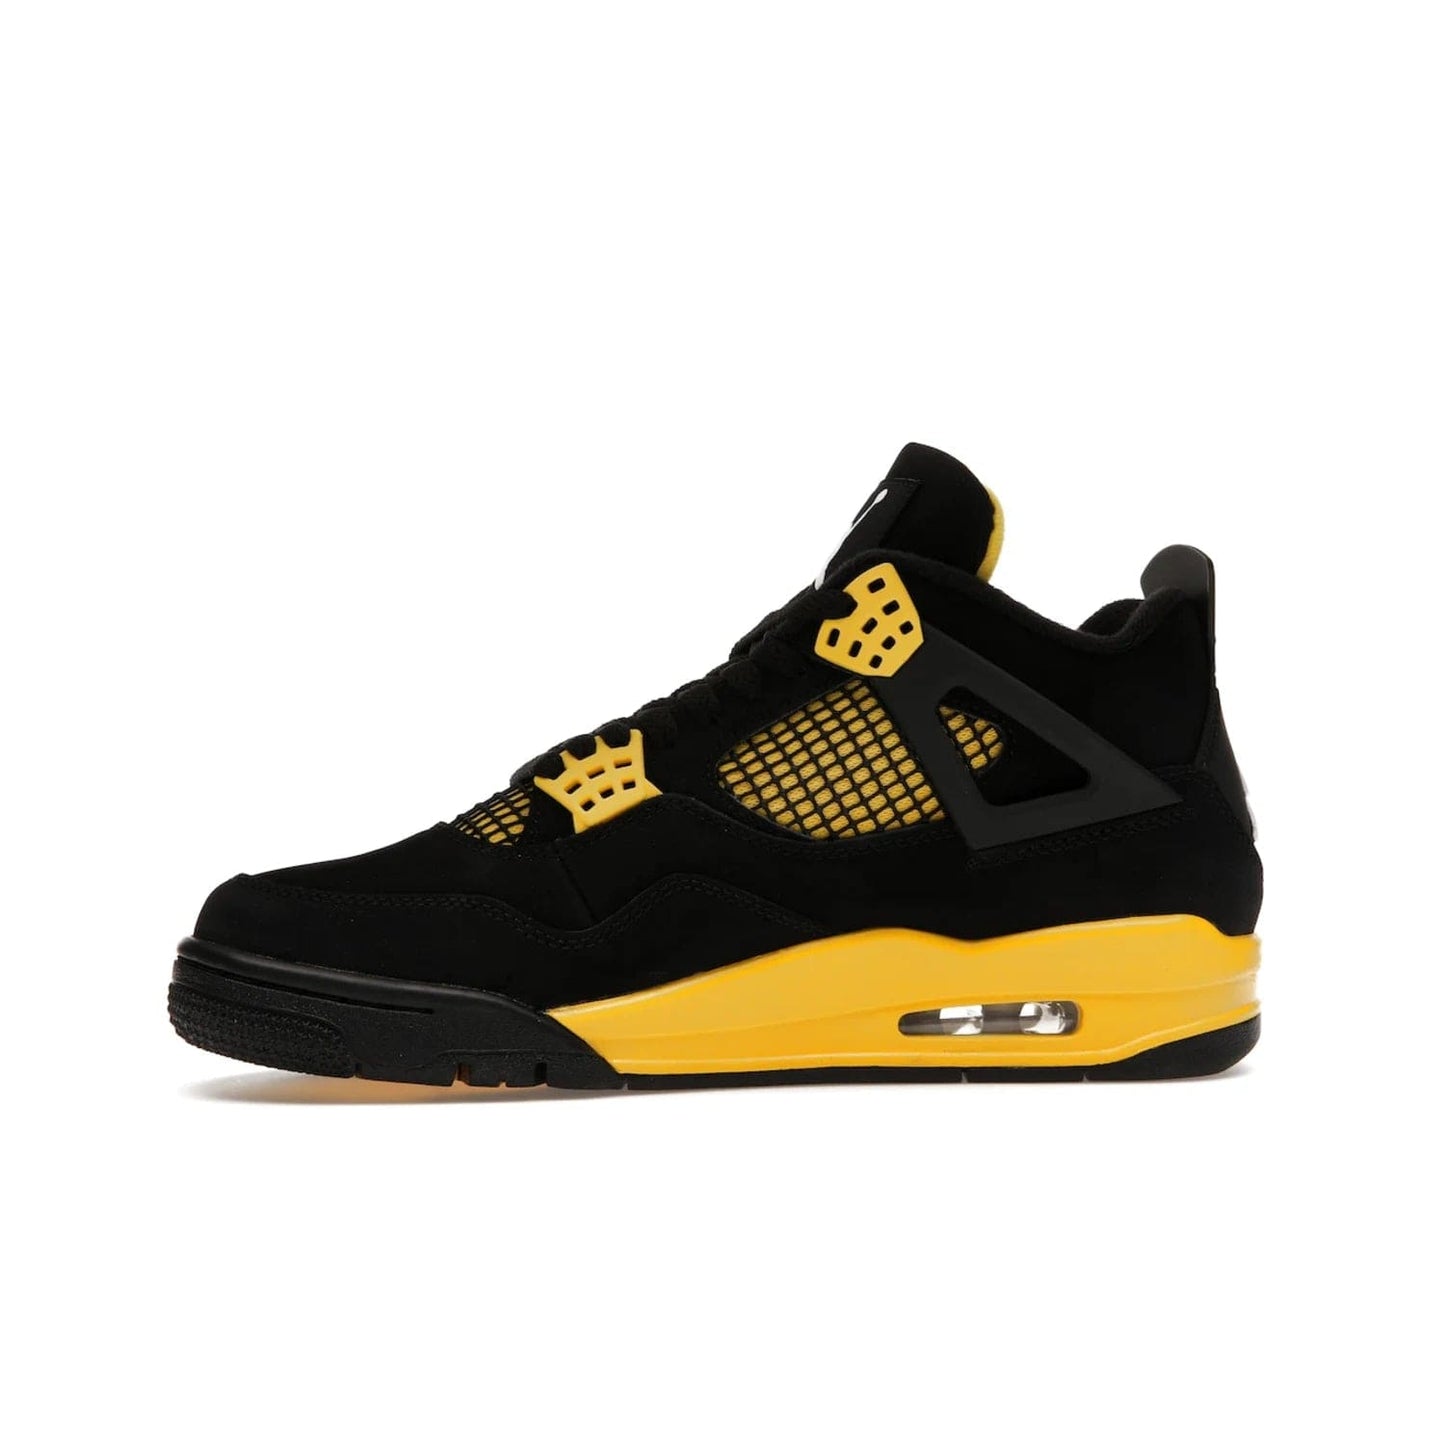 Jordan 4 Retro Thunder (2023) - Image 18 - Only at www.BallersClubKickz.com - Iconic Air Jordan 4 Retro Thunder (2023) returns with black nubuck upper and Tour Yellow details. Featuring Jumpman logo on heel tab, tongue and insoles. Dropping May 13th, 2023.